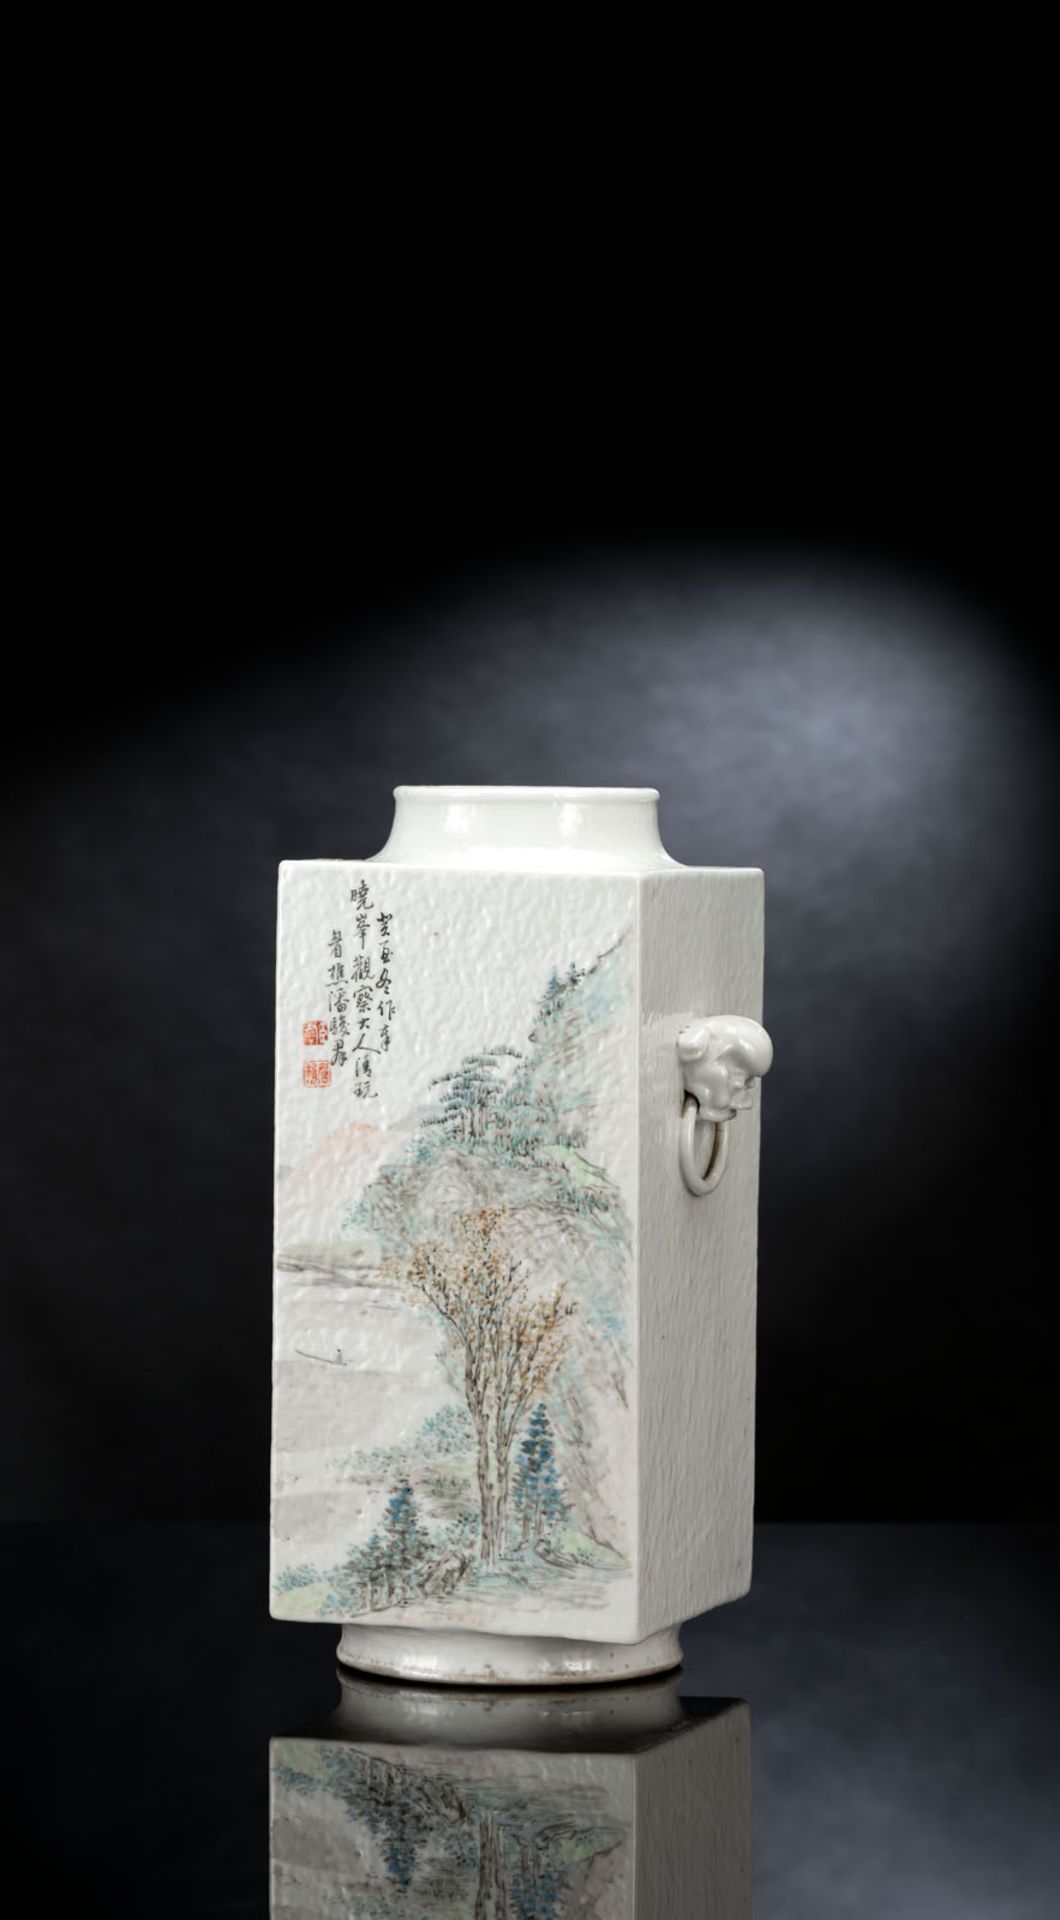 A CONG-SHAPED PORCELAIN VASE WITH A SCENE OF A SCHOLAR AND A LANDSCAPE BY JIN GAO